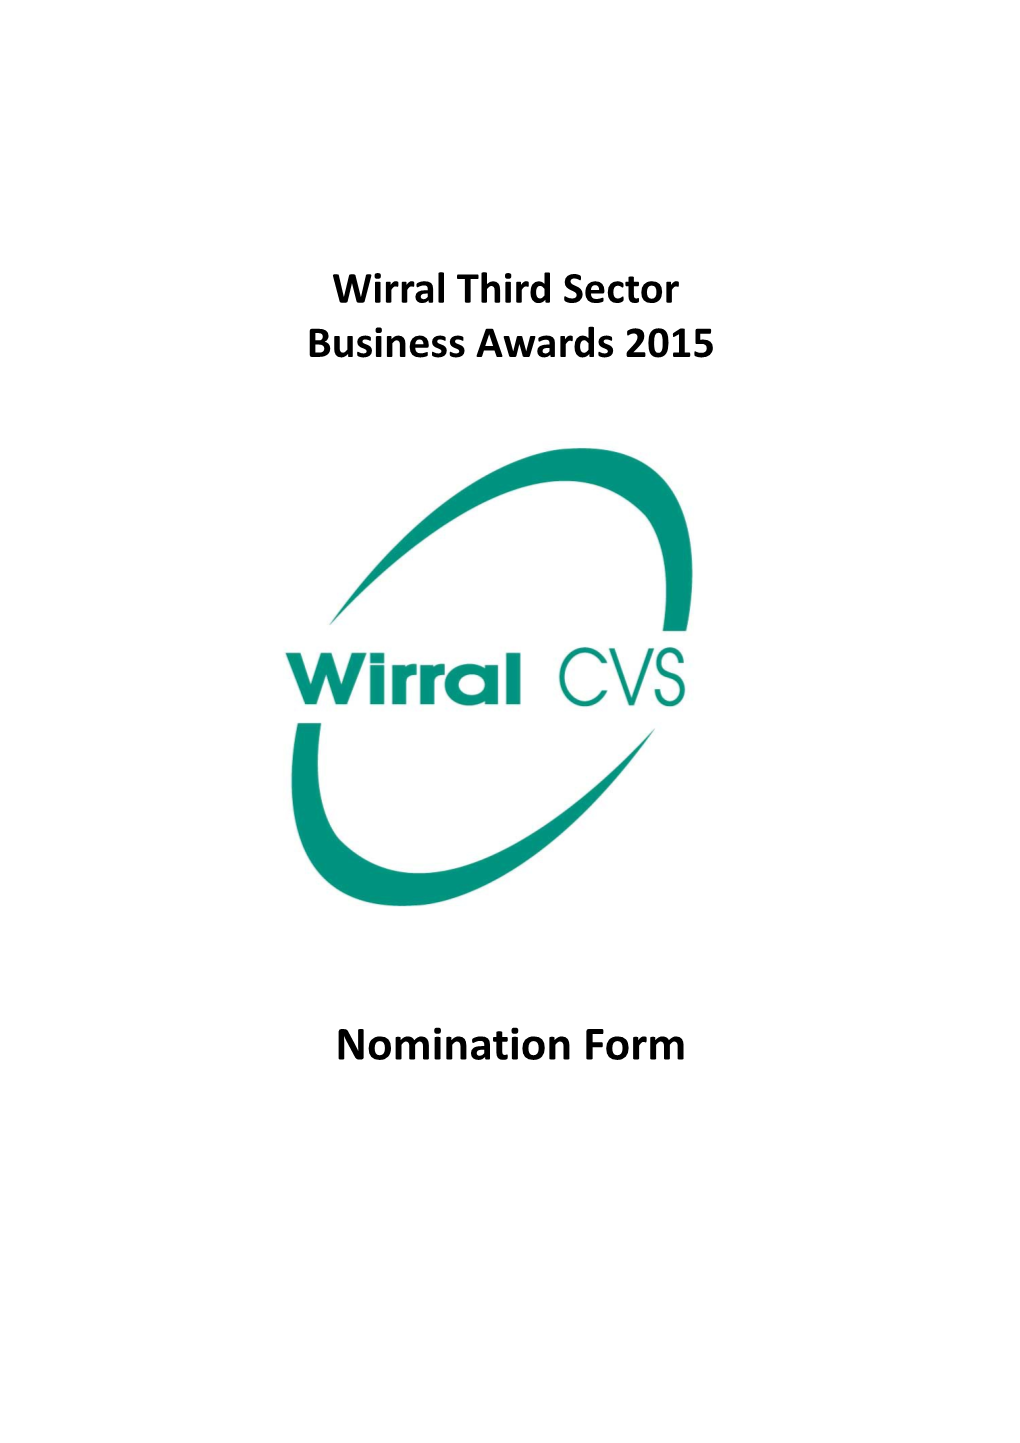 Wirral Third Sector Business Awards 2015